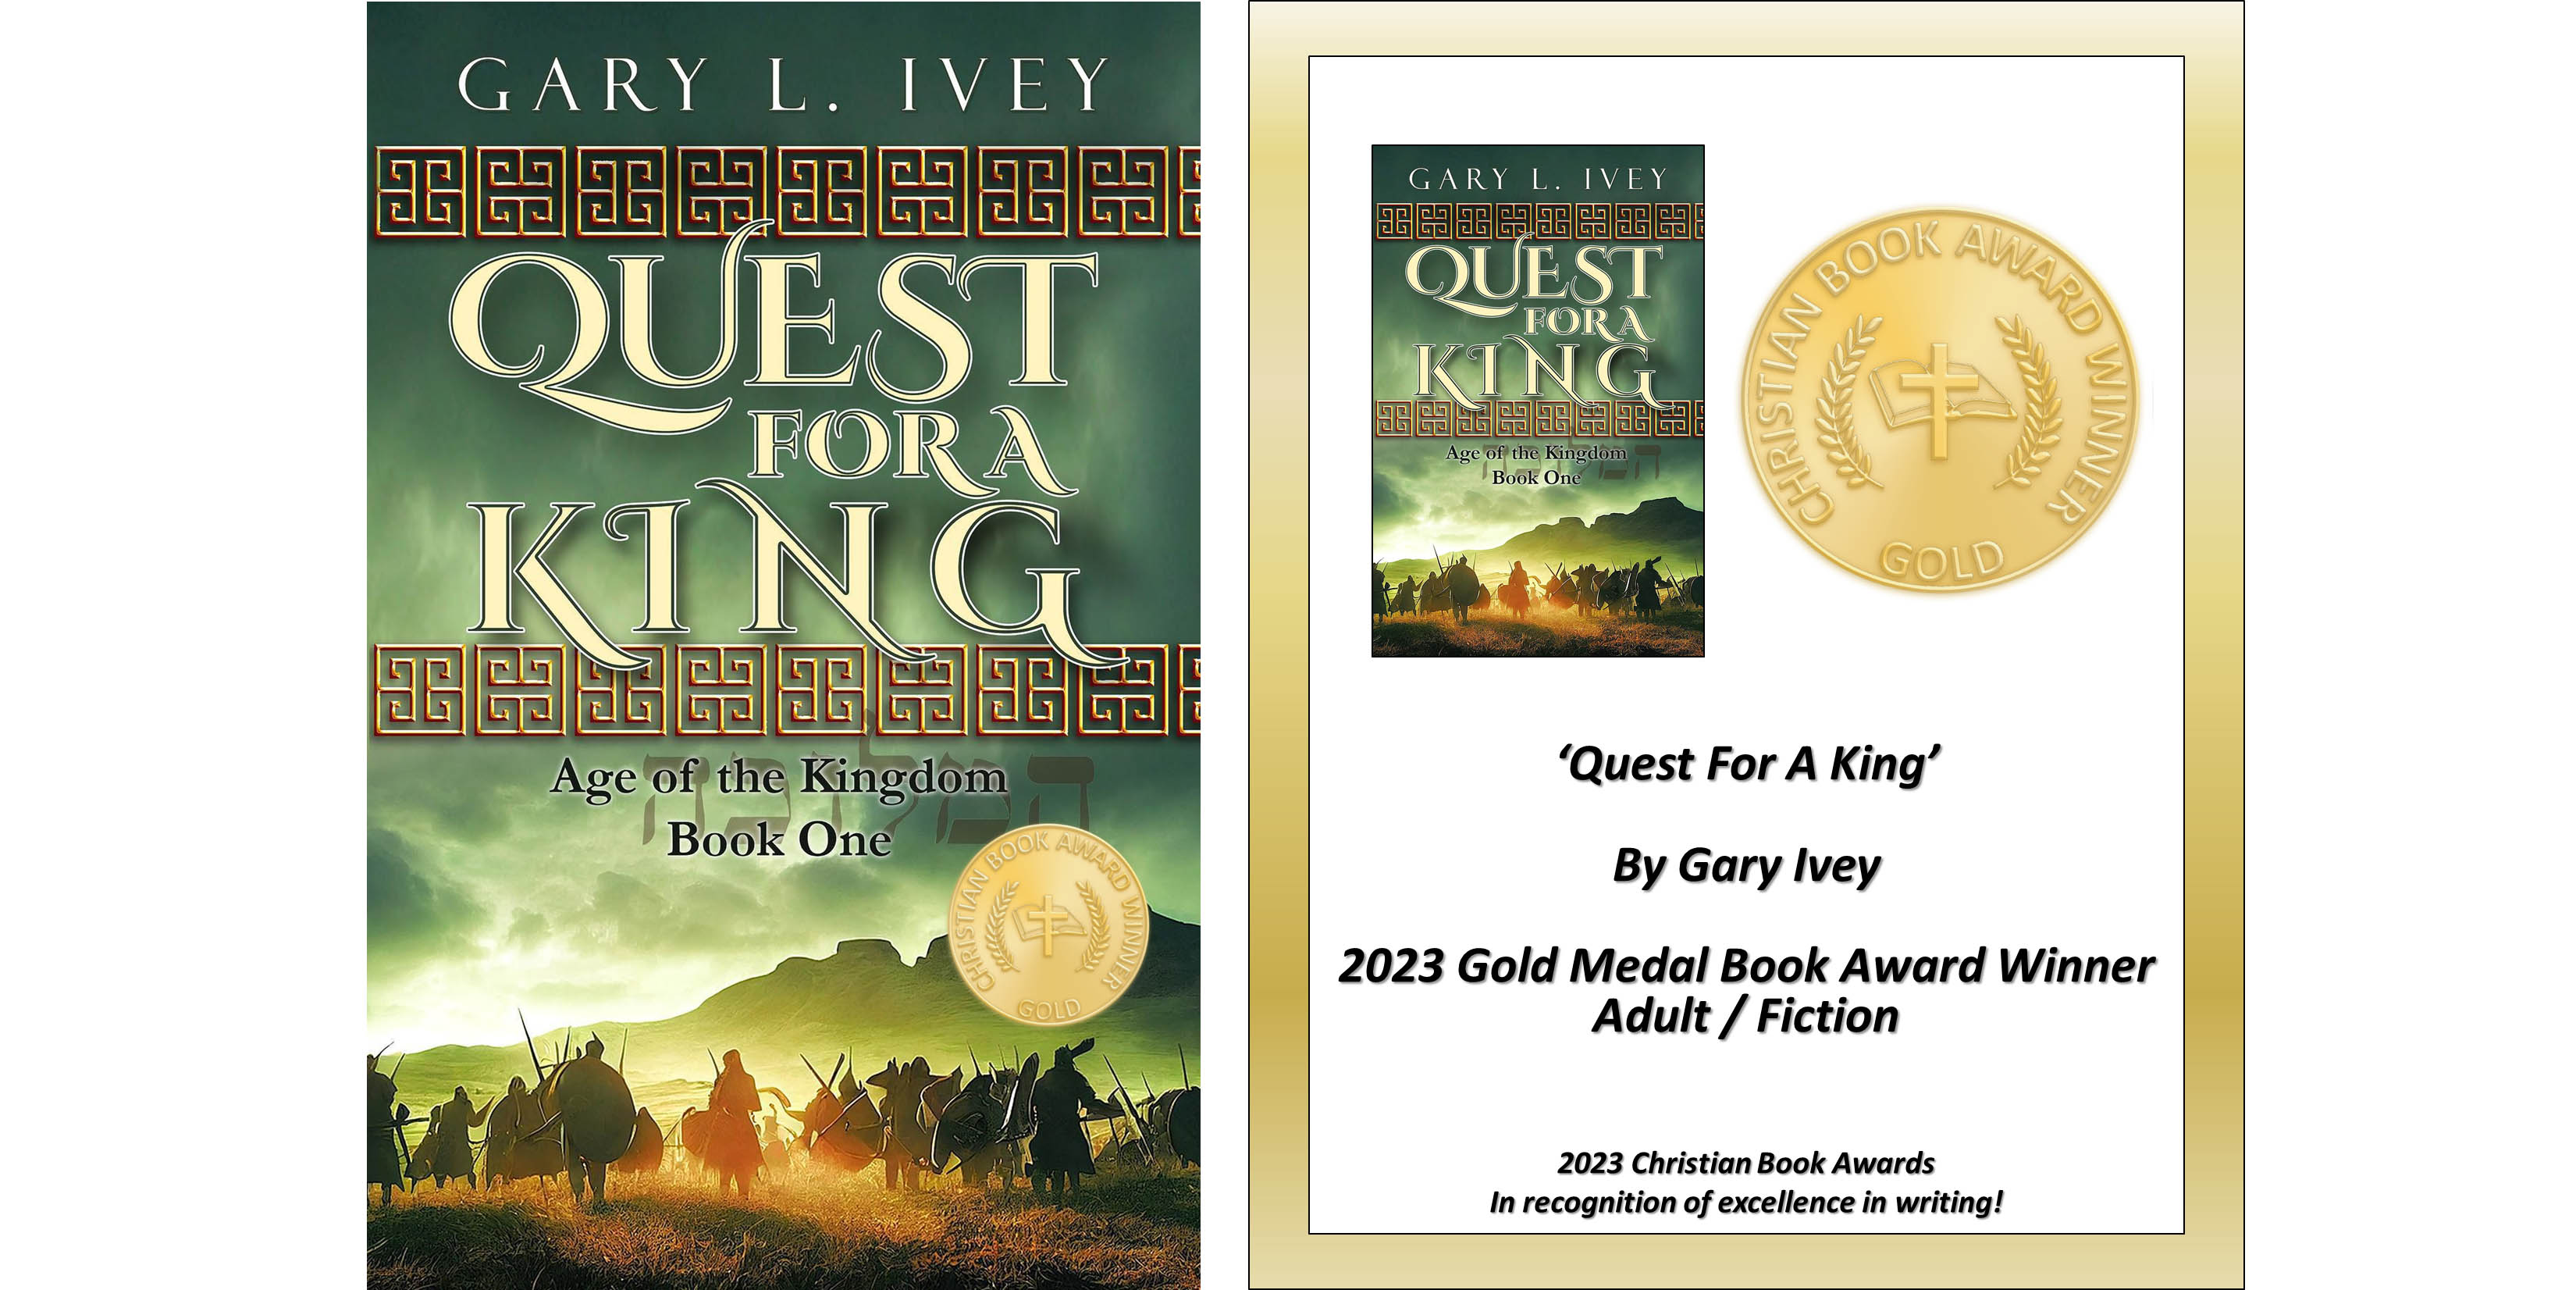 Quest For A King Award Winning Certificate AndCover Oct 23